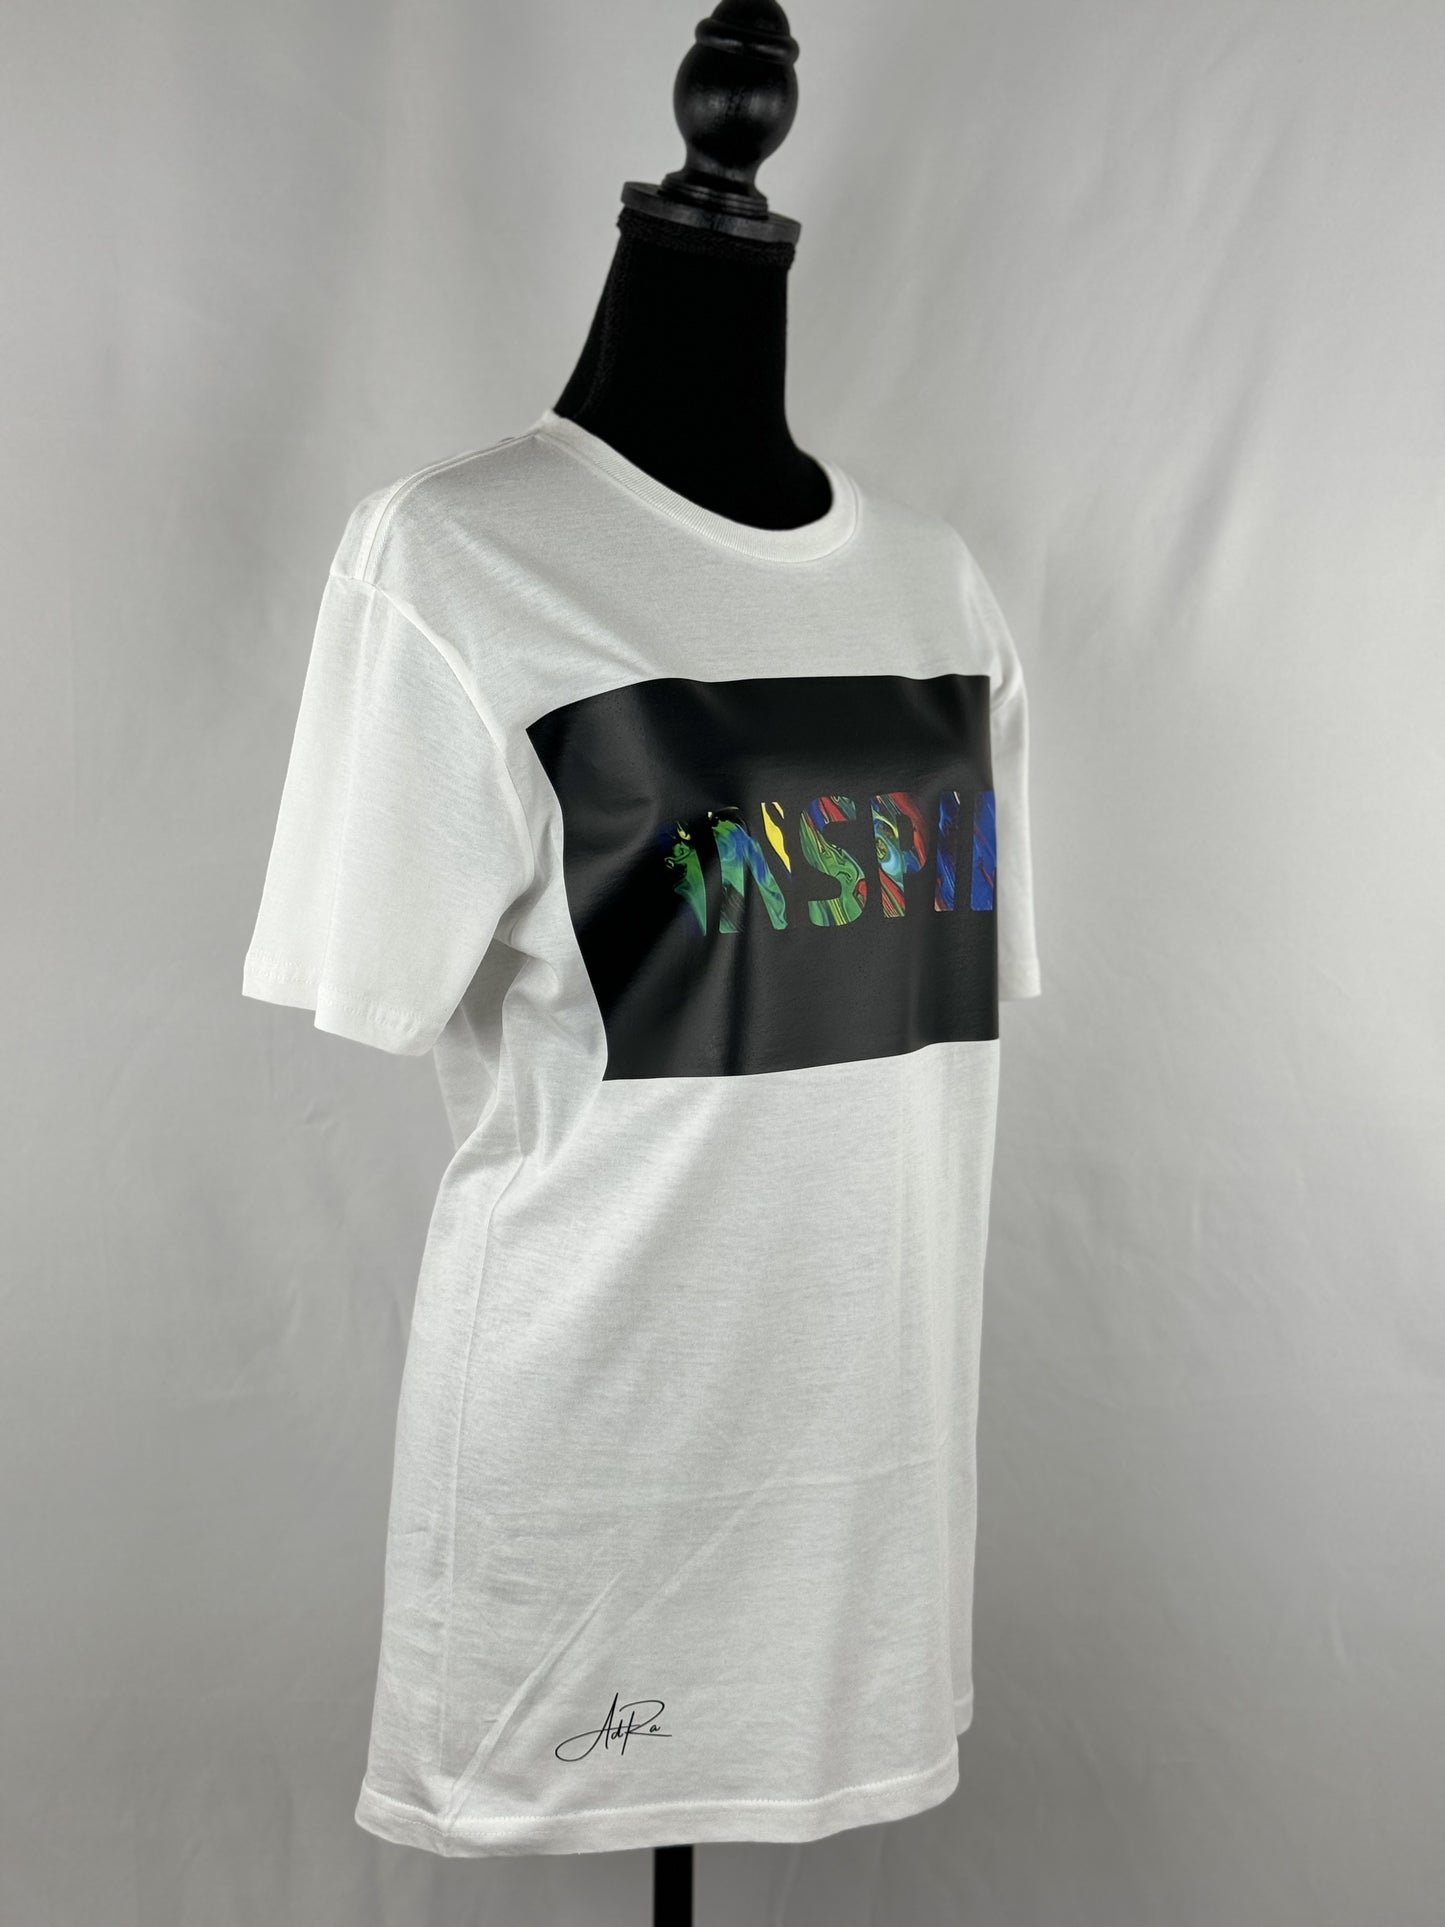 "INSPIRE" Multi-Colored Lettering Tee - Make a Statement with AdRa Apparel